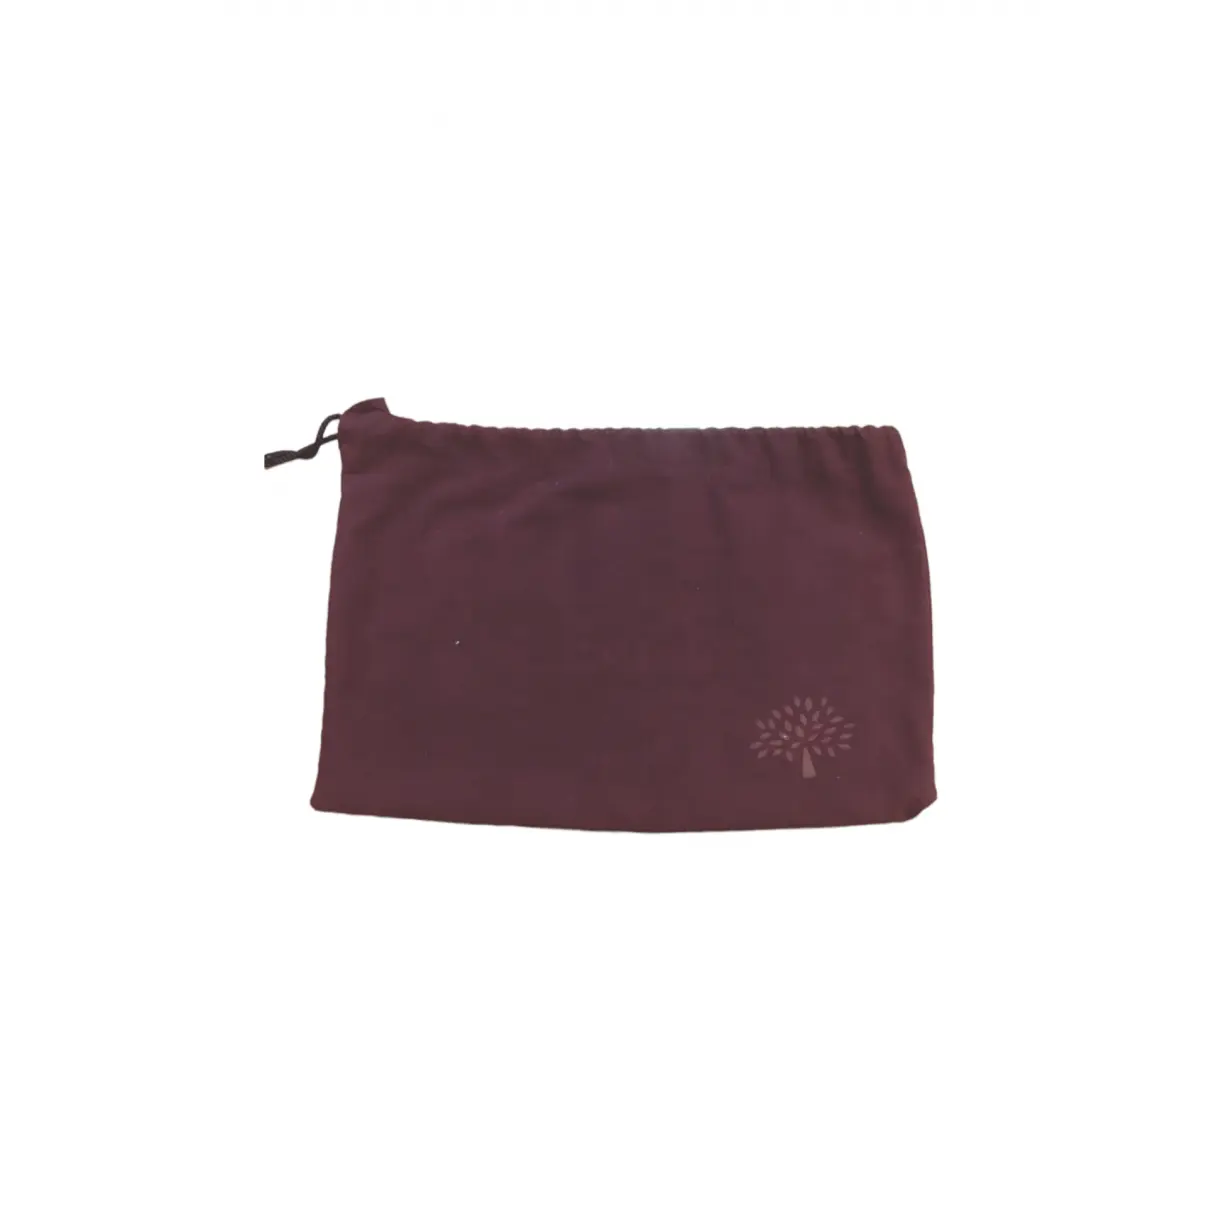 Lily leather crossbody bag Mulberry